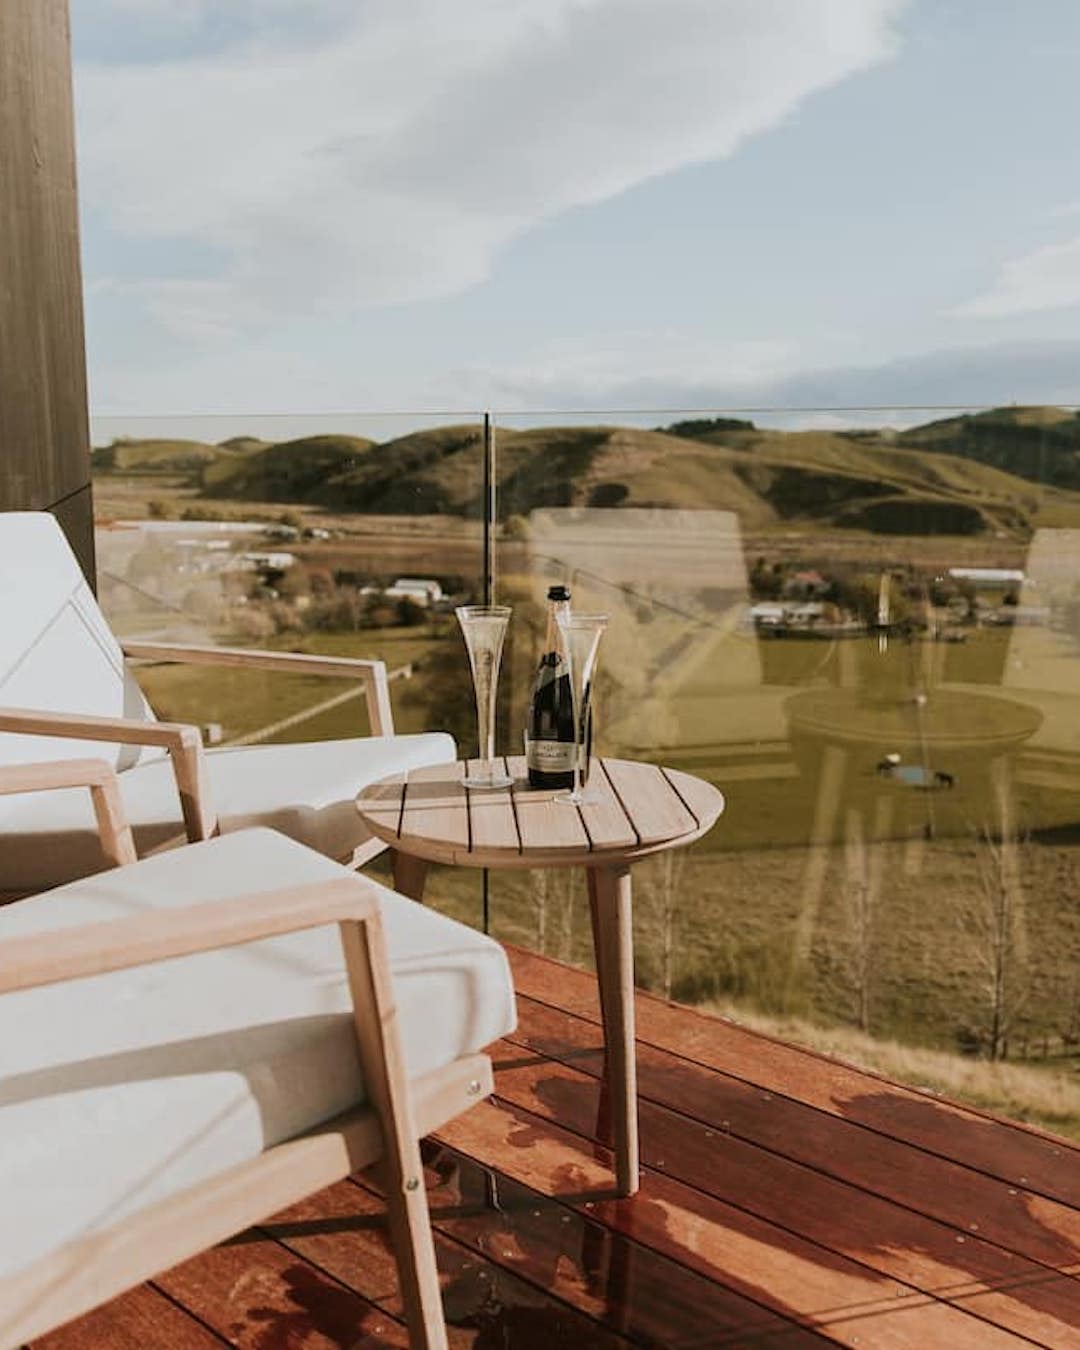 An Airbnb with an outdoor setting with champagne overlooking farmland